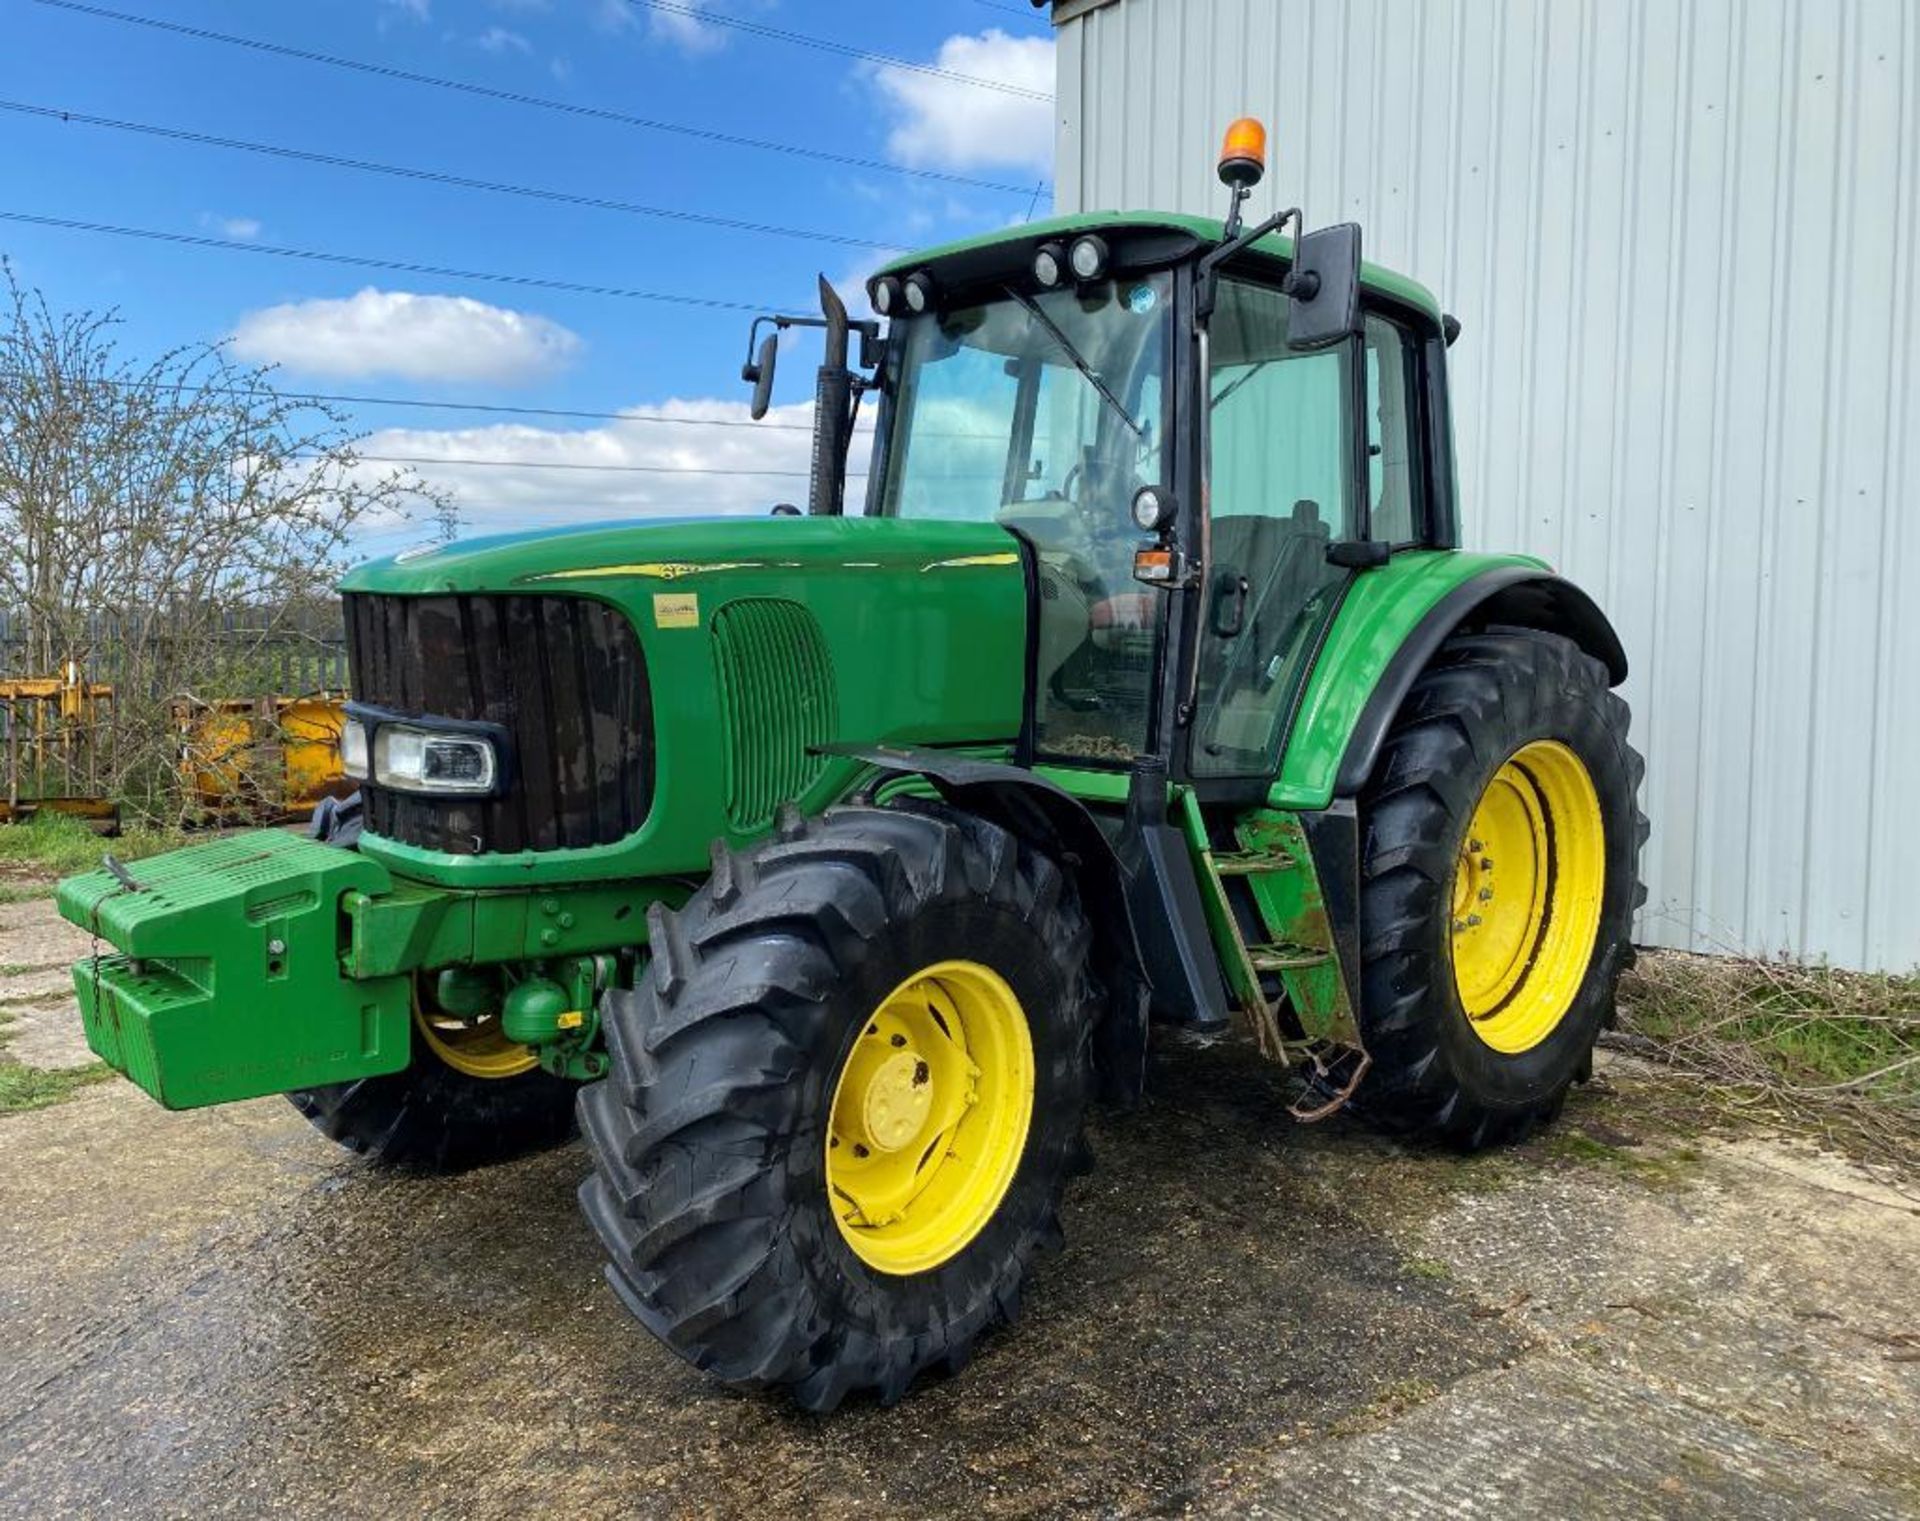 2003 John Deere 6620, 4wd, front wafer weights, 2 spools. Reg: OEO3 ZPB. Hours: 6,900 - Image 2 of 8